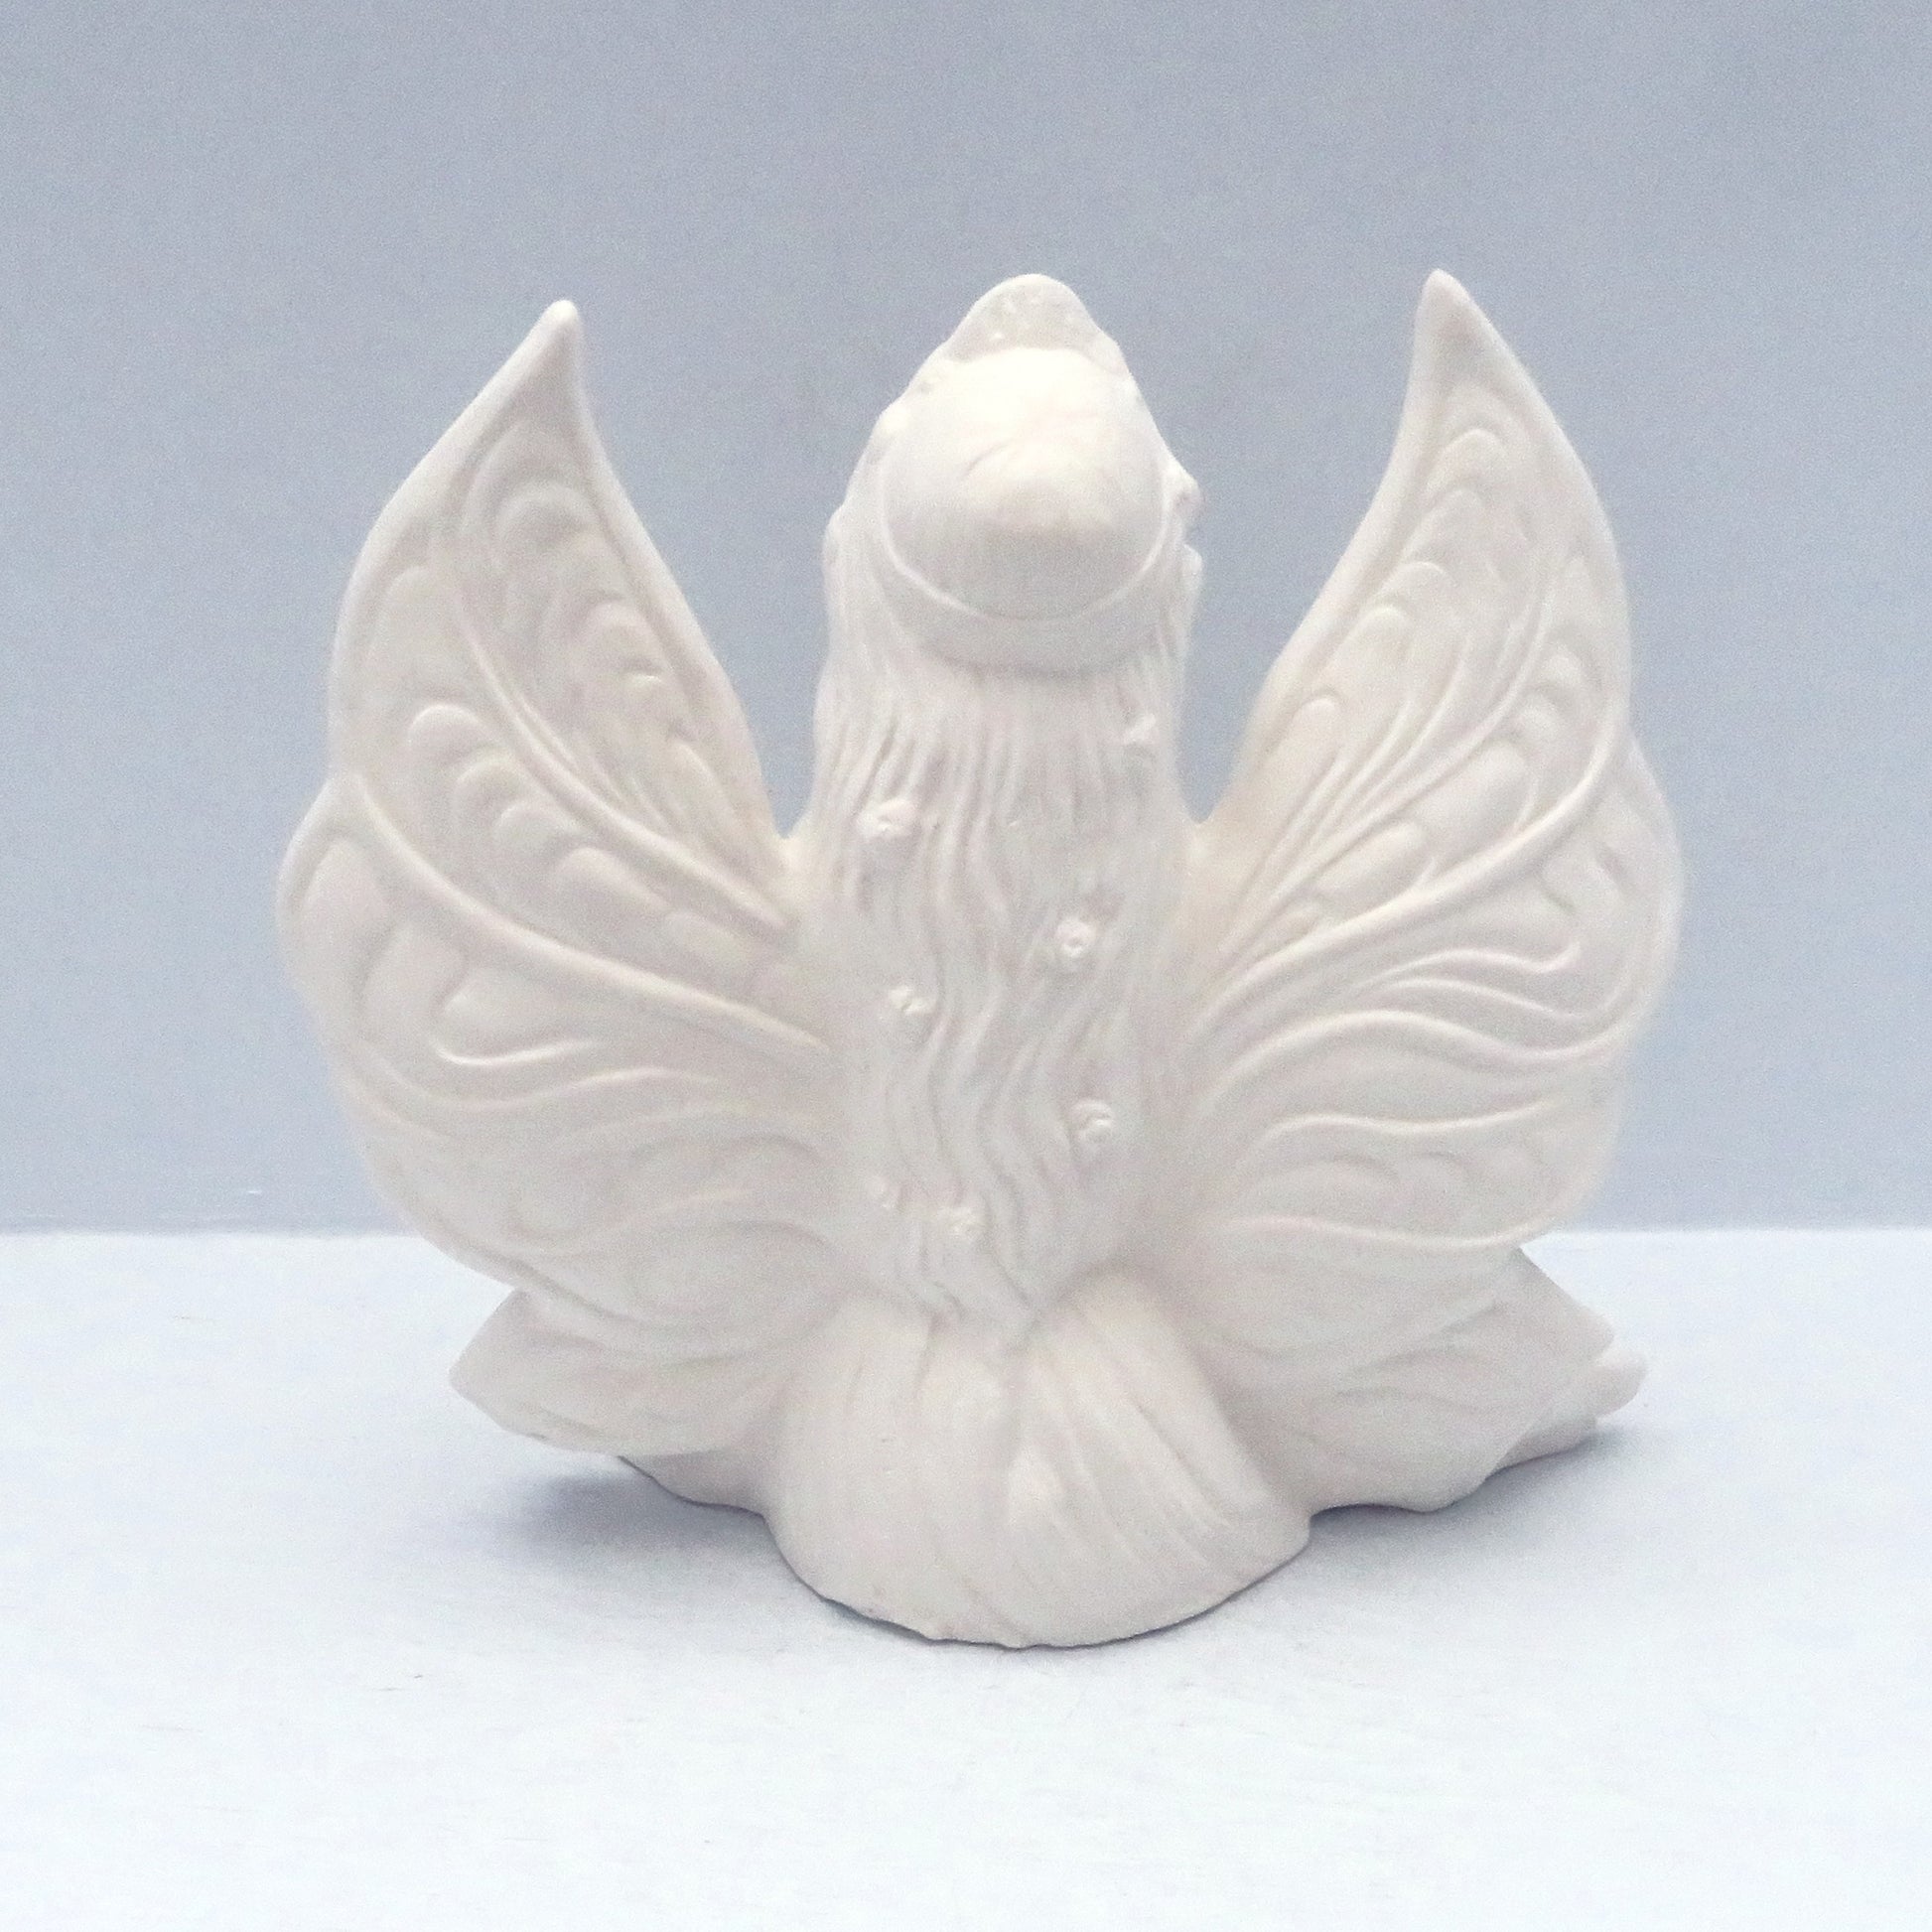 Rear view of unpainted ceramic fairy statue showing her long hair with flowers in it, the detail in her wings, on a light blue surface.